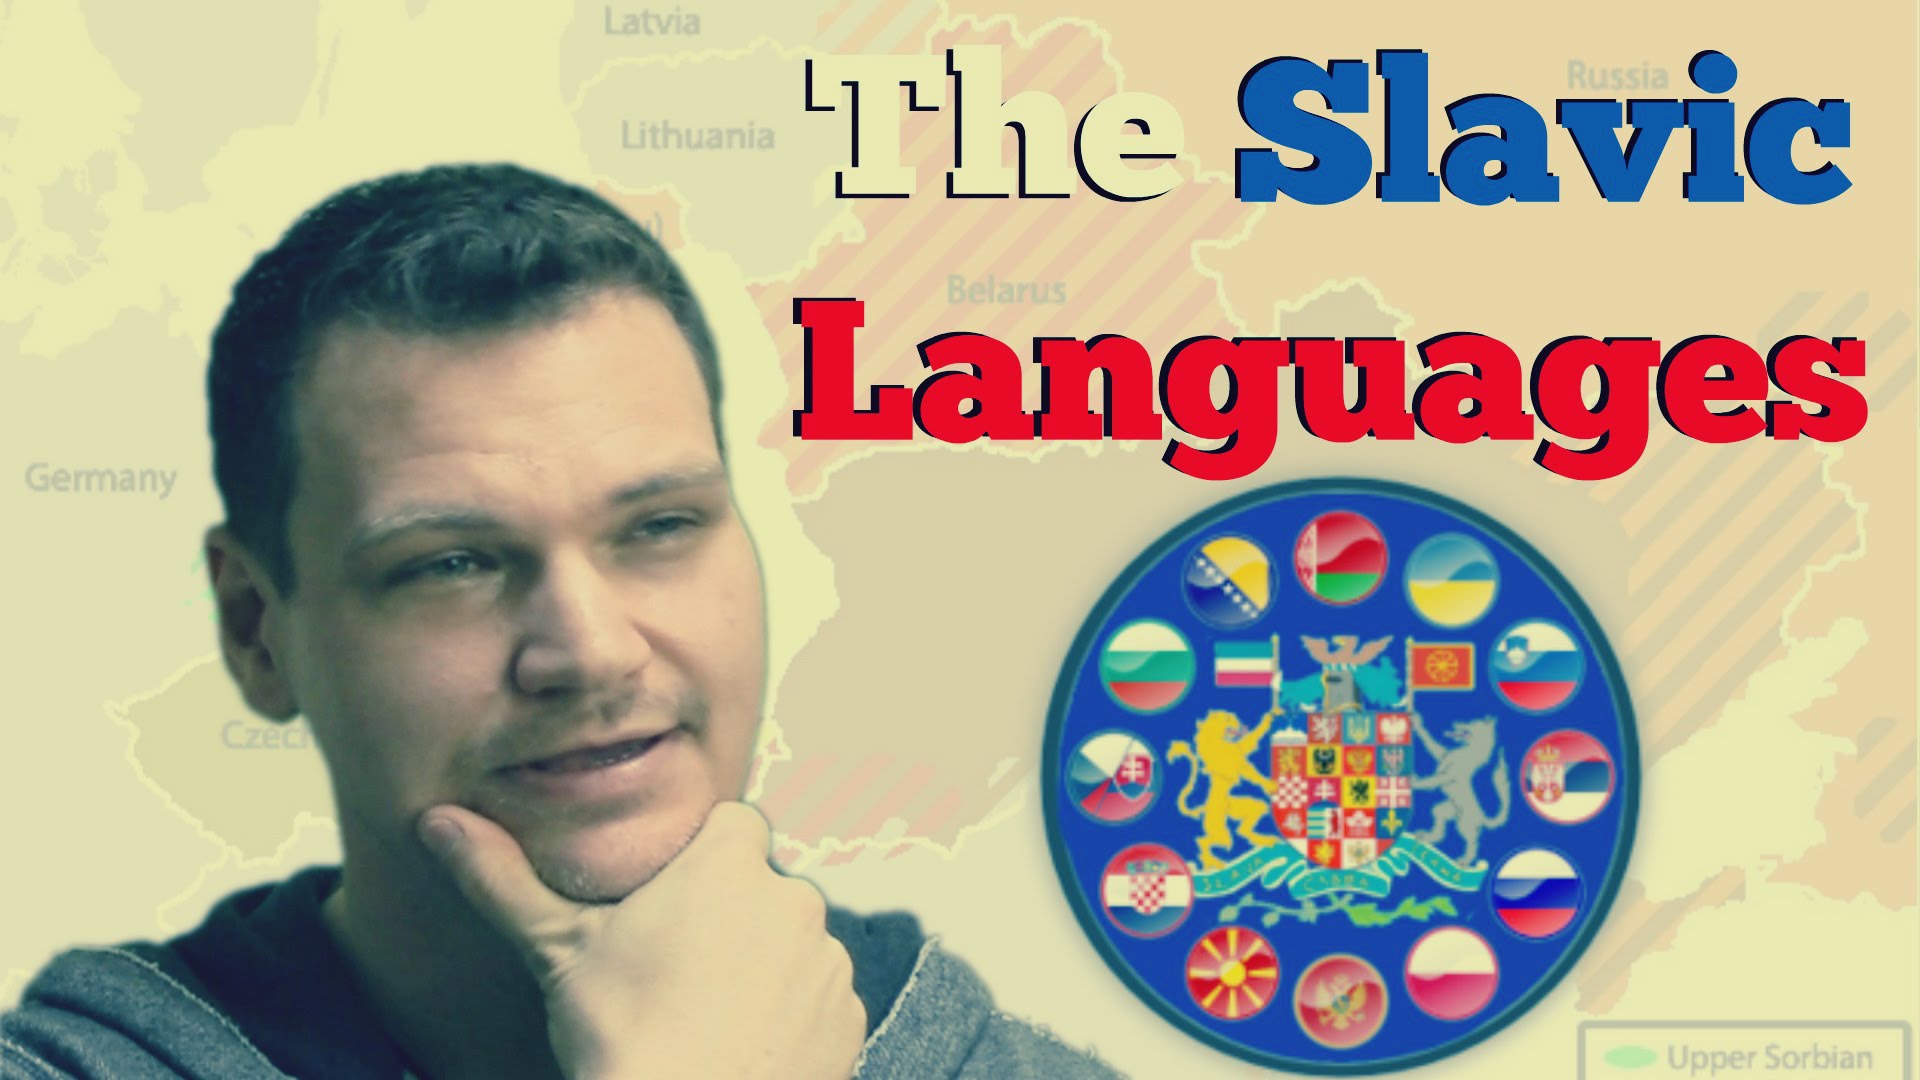 The Slavic Languages and What Makes Them a FAMILY